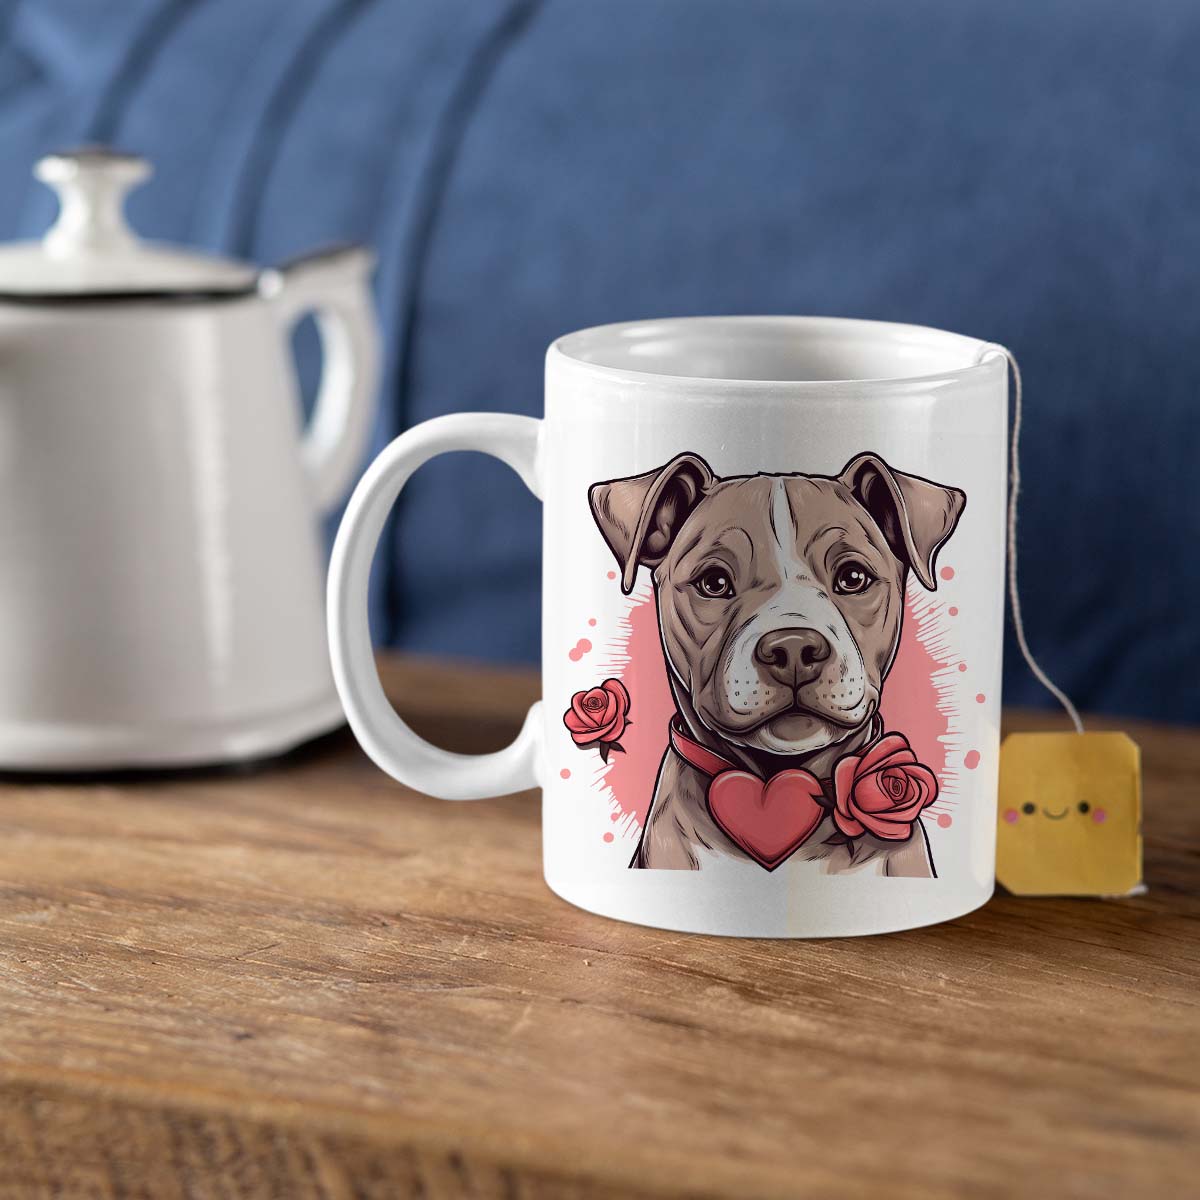 Custom Valentine's Day Dog Mug, Personalized Valentine's Day Gift for Dog Lover, Cute Pit Pull Love Ceramic Mug, Dog Coffee Mugs, Personalized Pet Mugs, Cute Valentine Puppy Heart Ceramic Mug, Valentines Gift